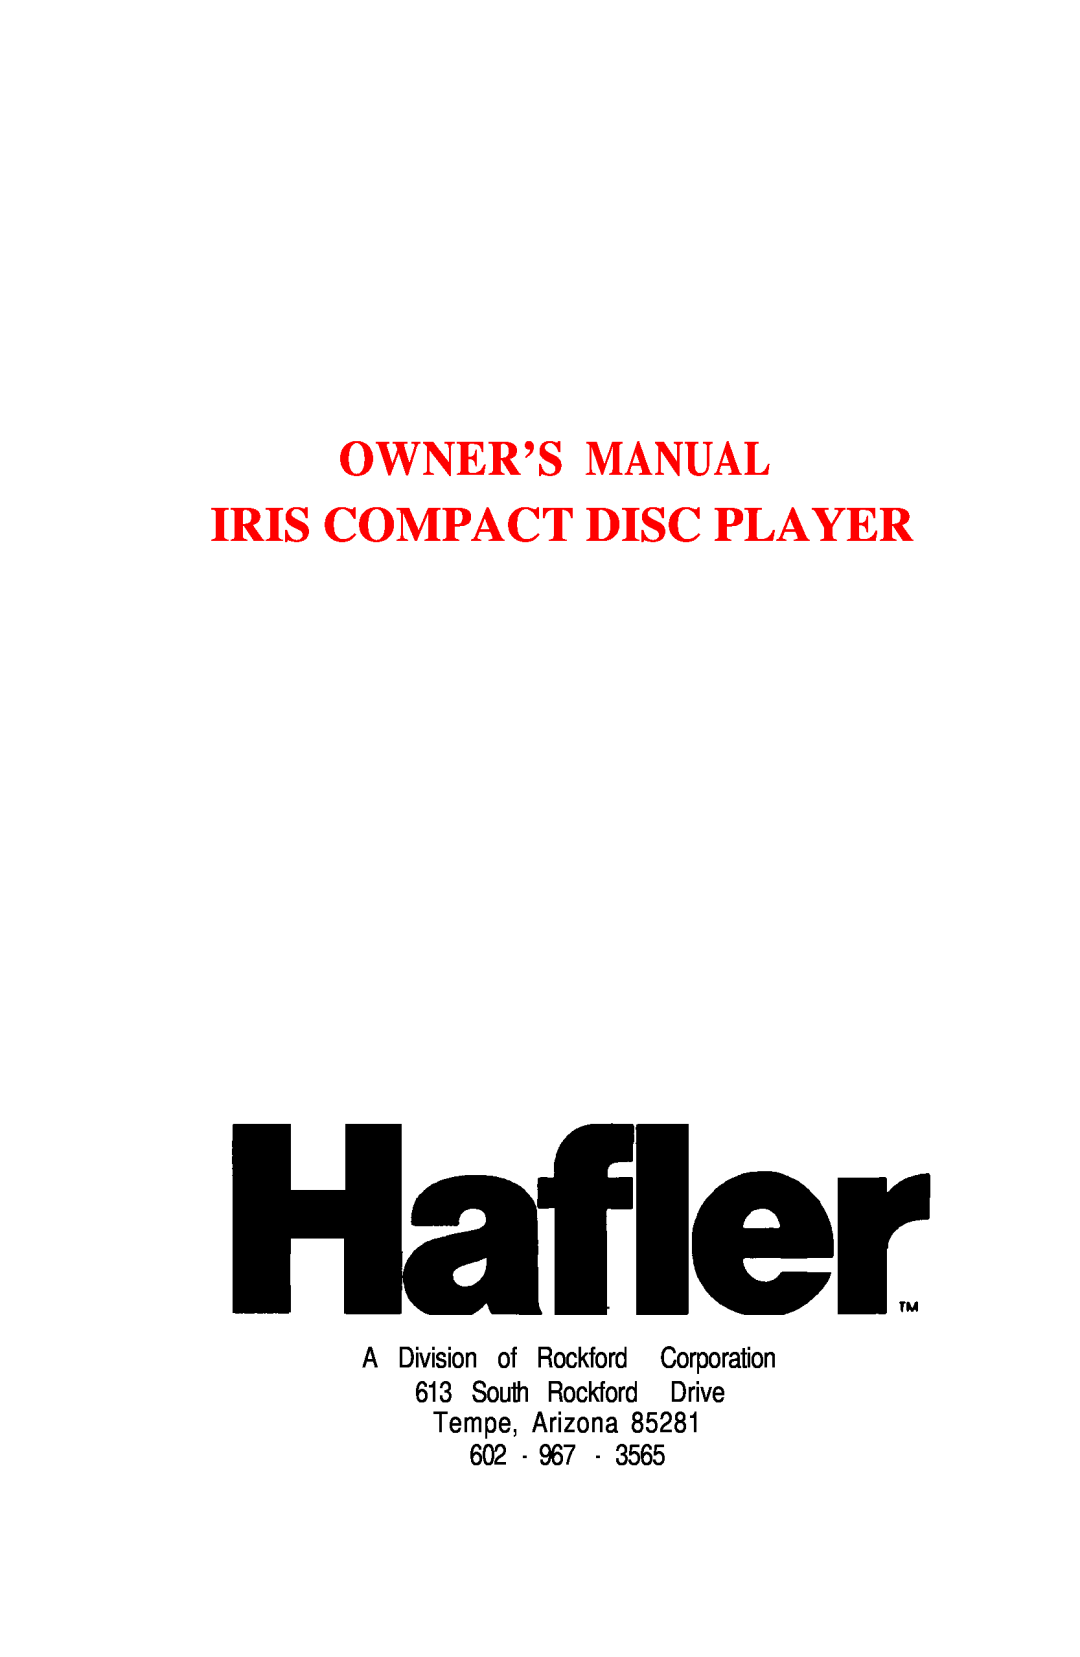 Hafler IRIS COMPACT DISC PLAYER owner manual A Division of Rockford Corporation, South Rockford Drive Tempe, Arizona, 602 